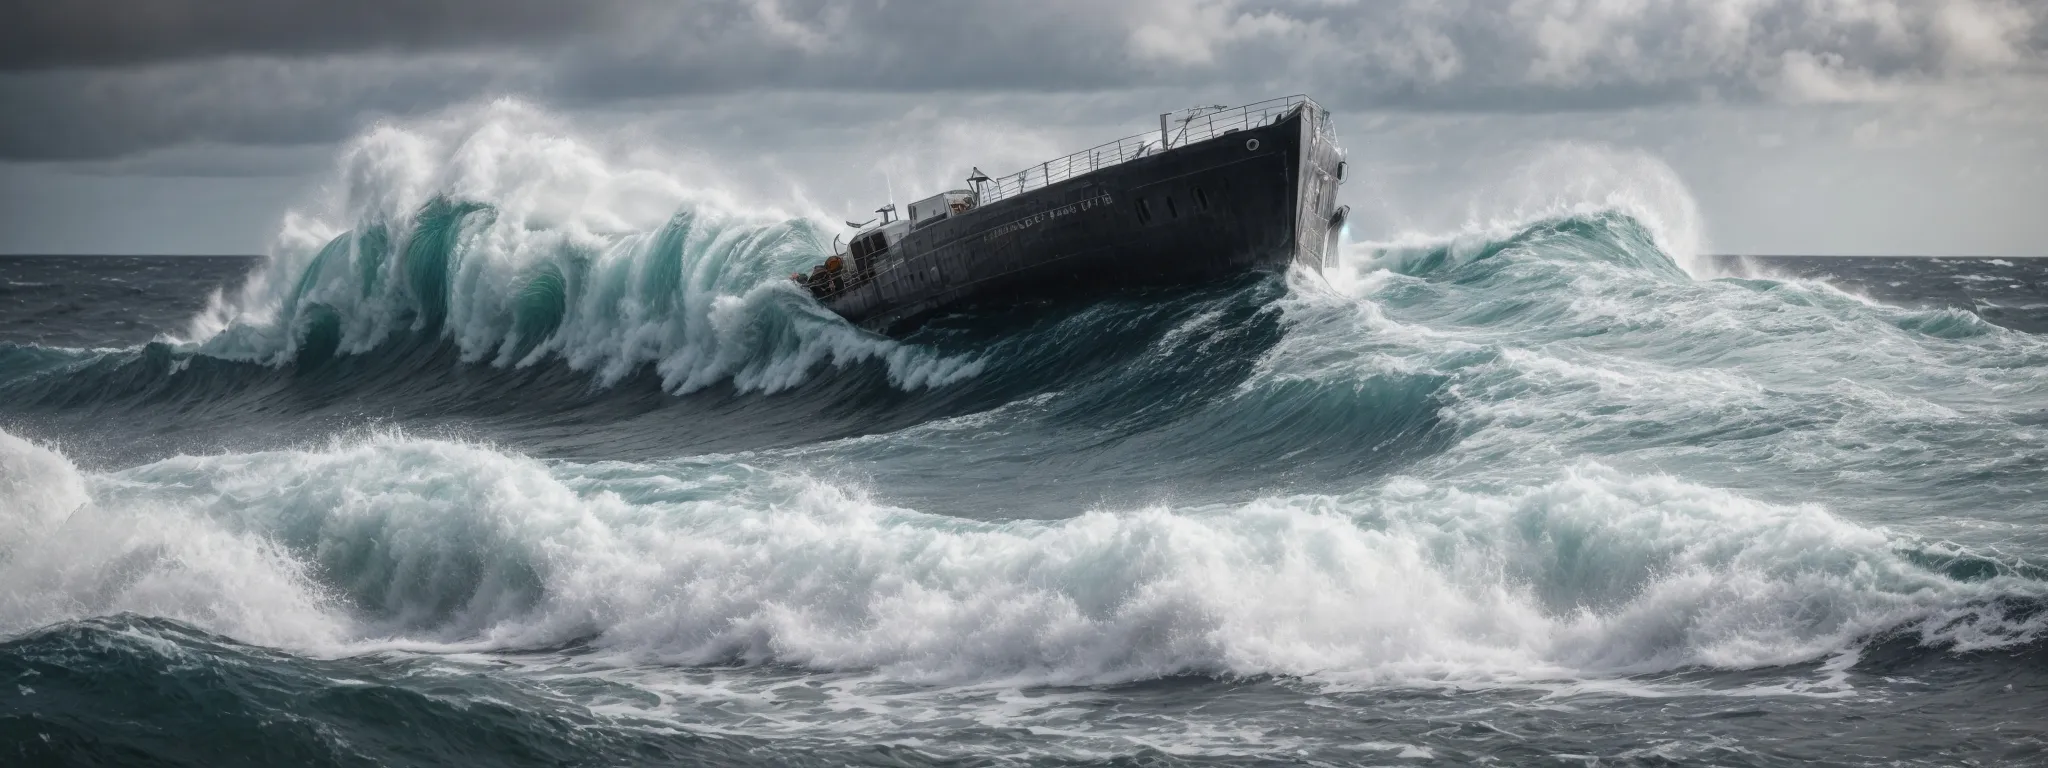 a lone ship braves the relentless, churning ocean, symbolizing the continuous struggle for mastering keyword research amidst the unpredictable tides of seo.